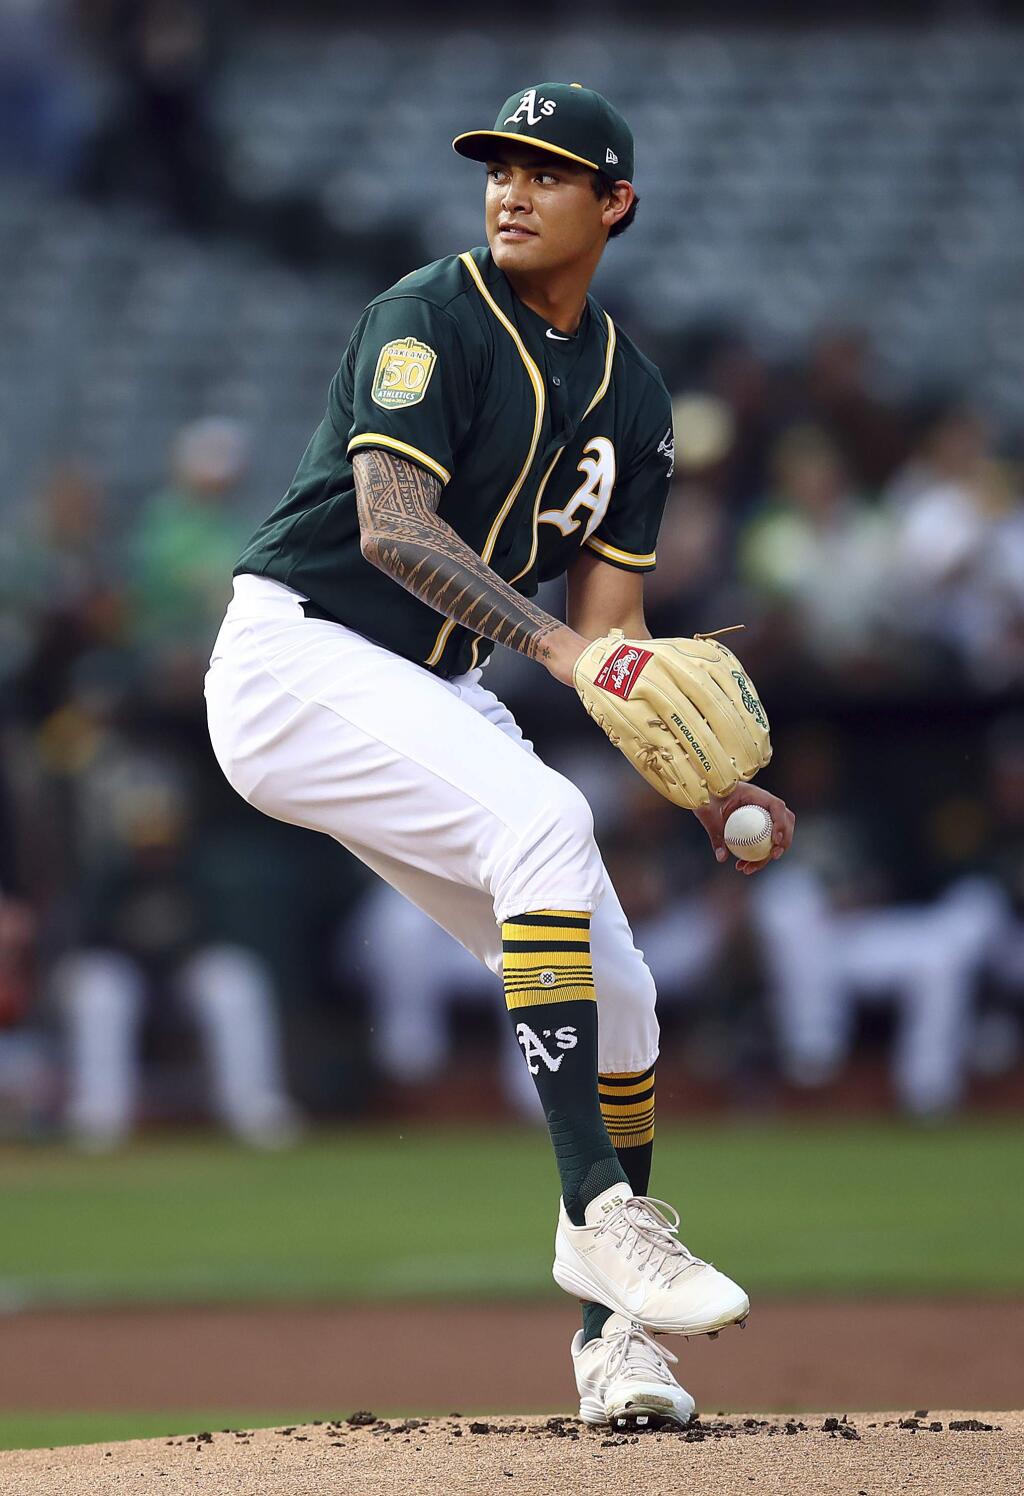 Oakland Athletics pitcher Sean Manaea works against the Seattle Mariners in the first inning of a baseball game Monday, Aug. 13, 2018, in Oakland, Calif. (AP Photo/Ben Margot)